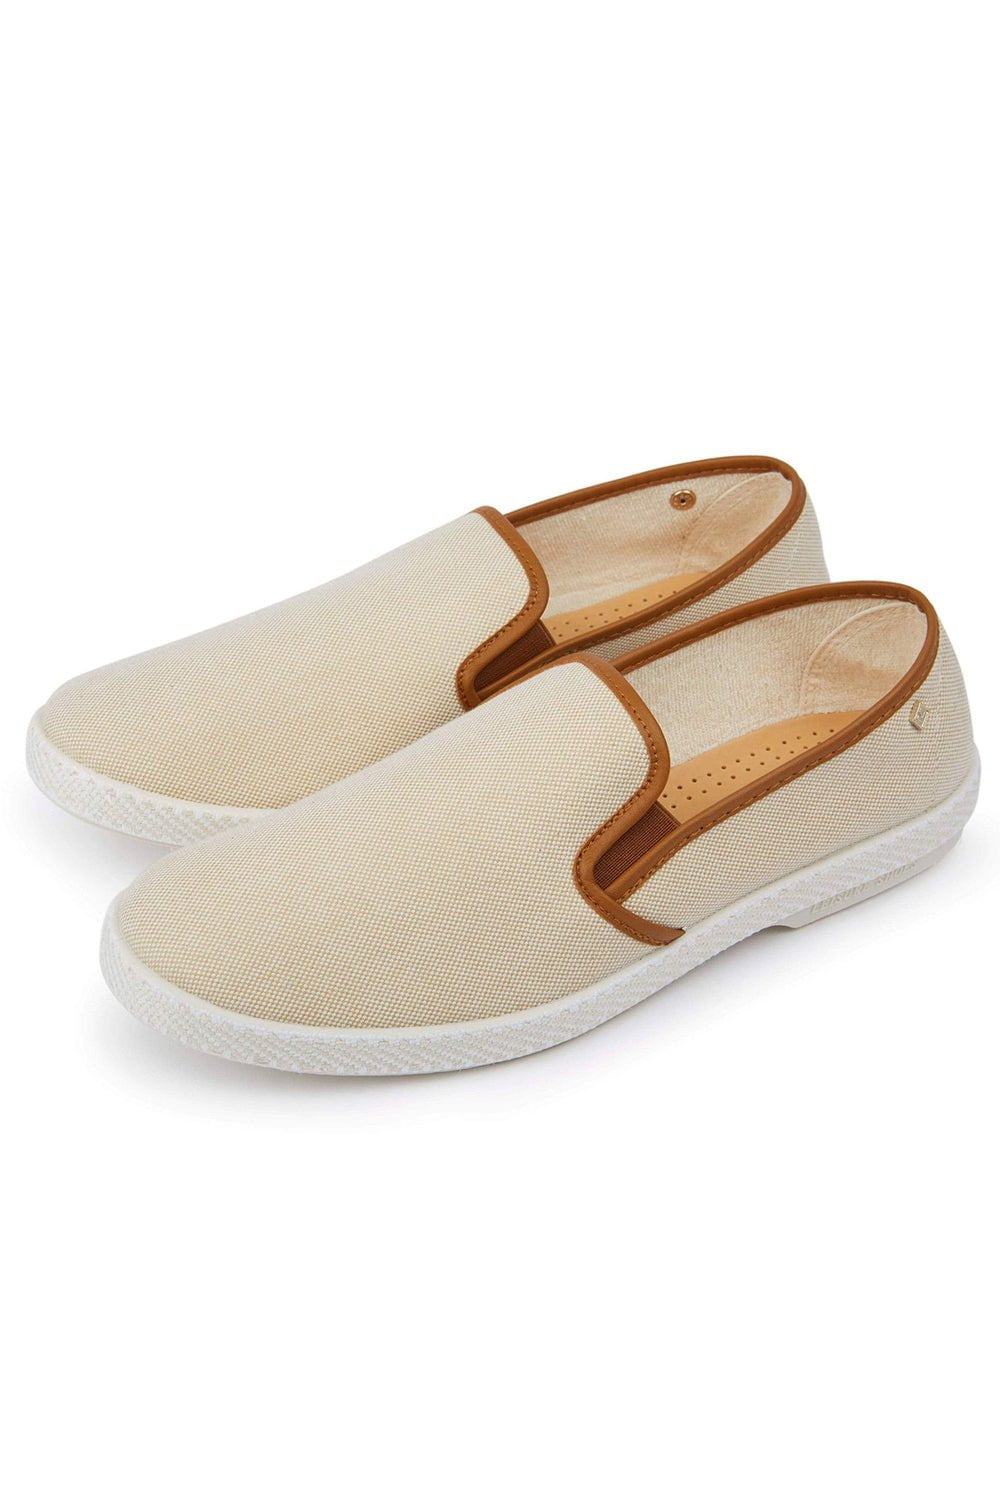 Les Champs Chantilly Oxford Cotton Slip On Loafer MENSSHOECASUAL RIVIERAS   